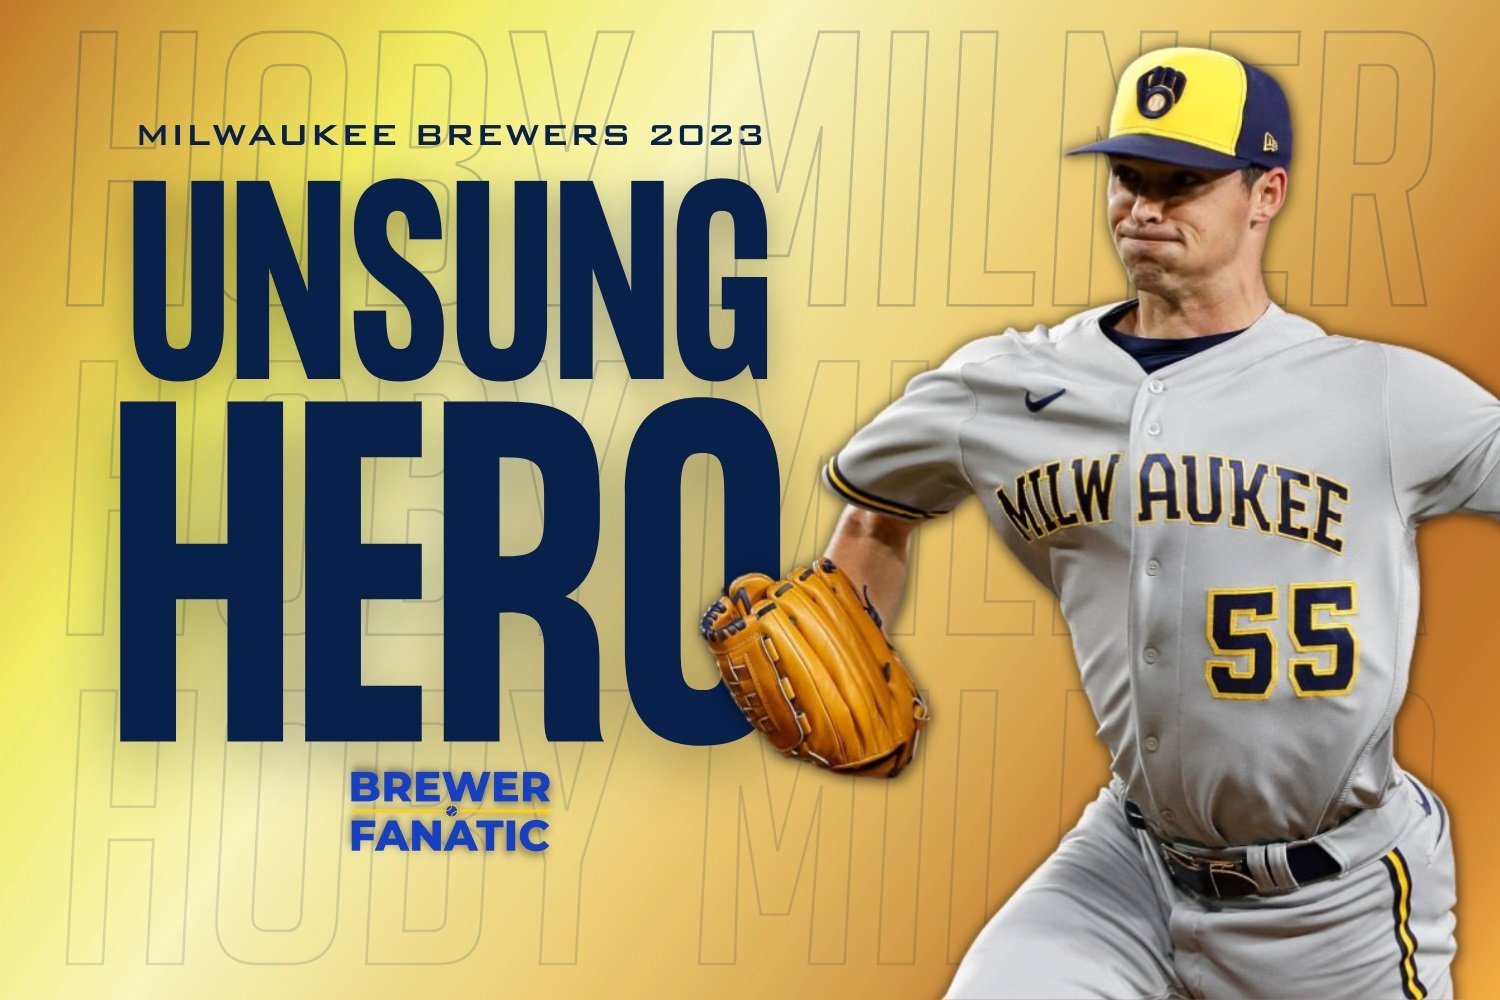 The 2023 Milwaukee Brewers Unsung Hero - Brewers - Brewer Fanatic